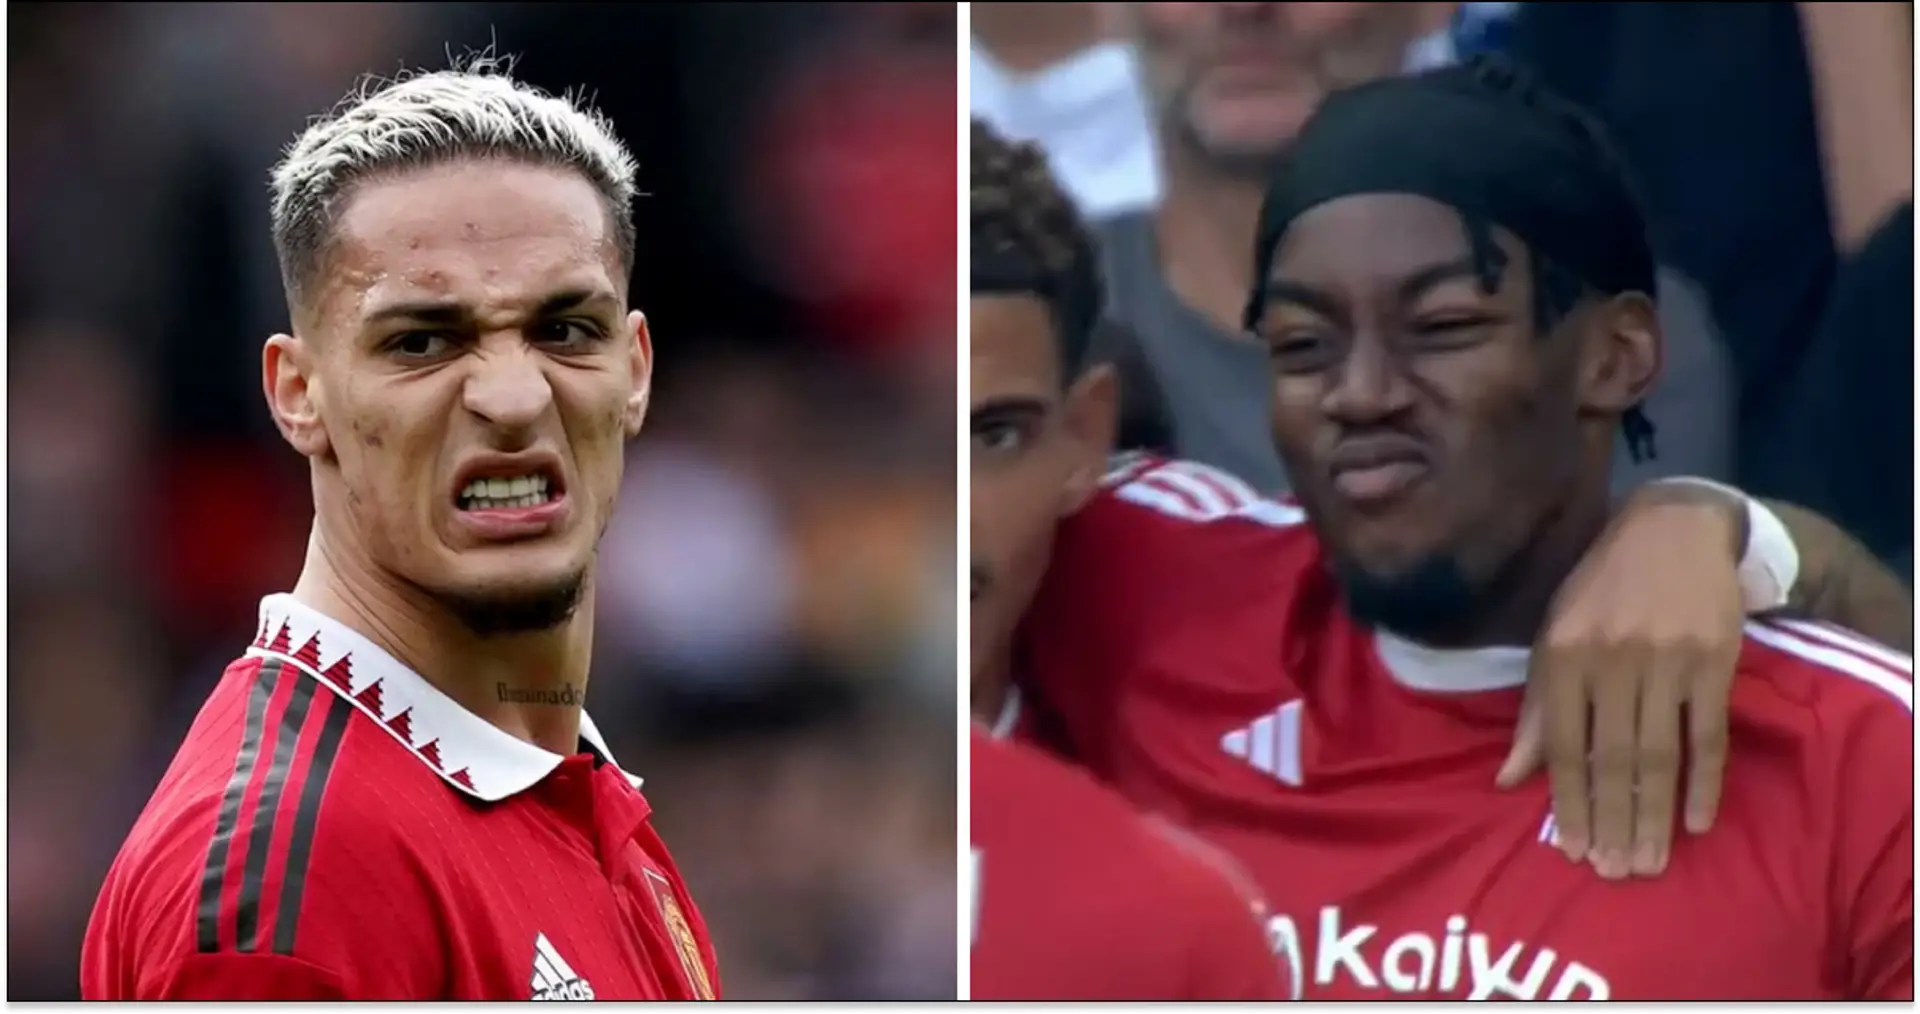 'Man United sold wrong Anthony': Fans react as Elanga gives Forest win over Chelsea